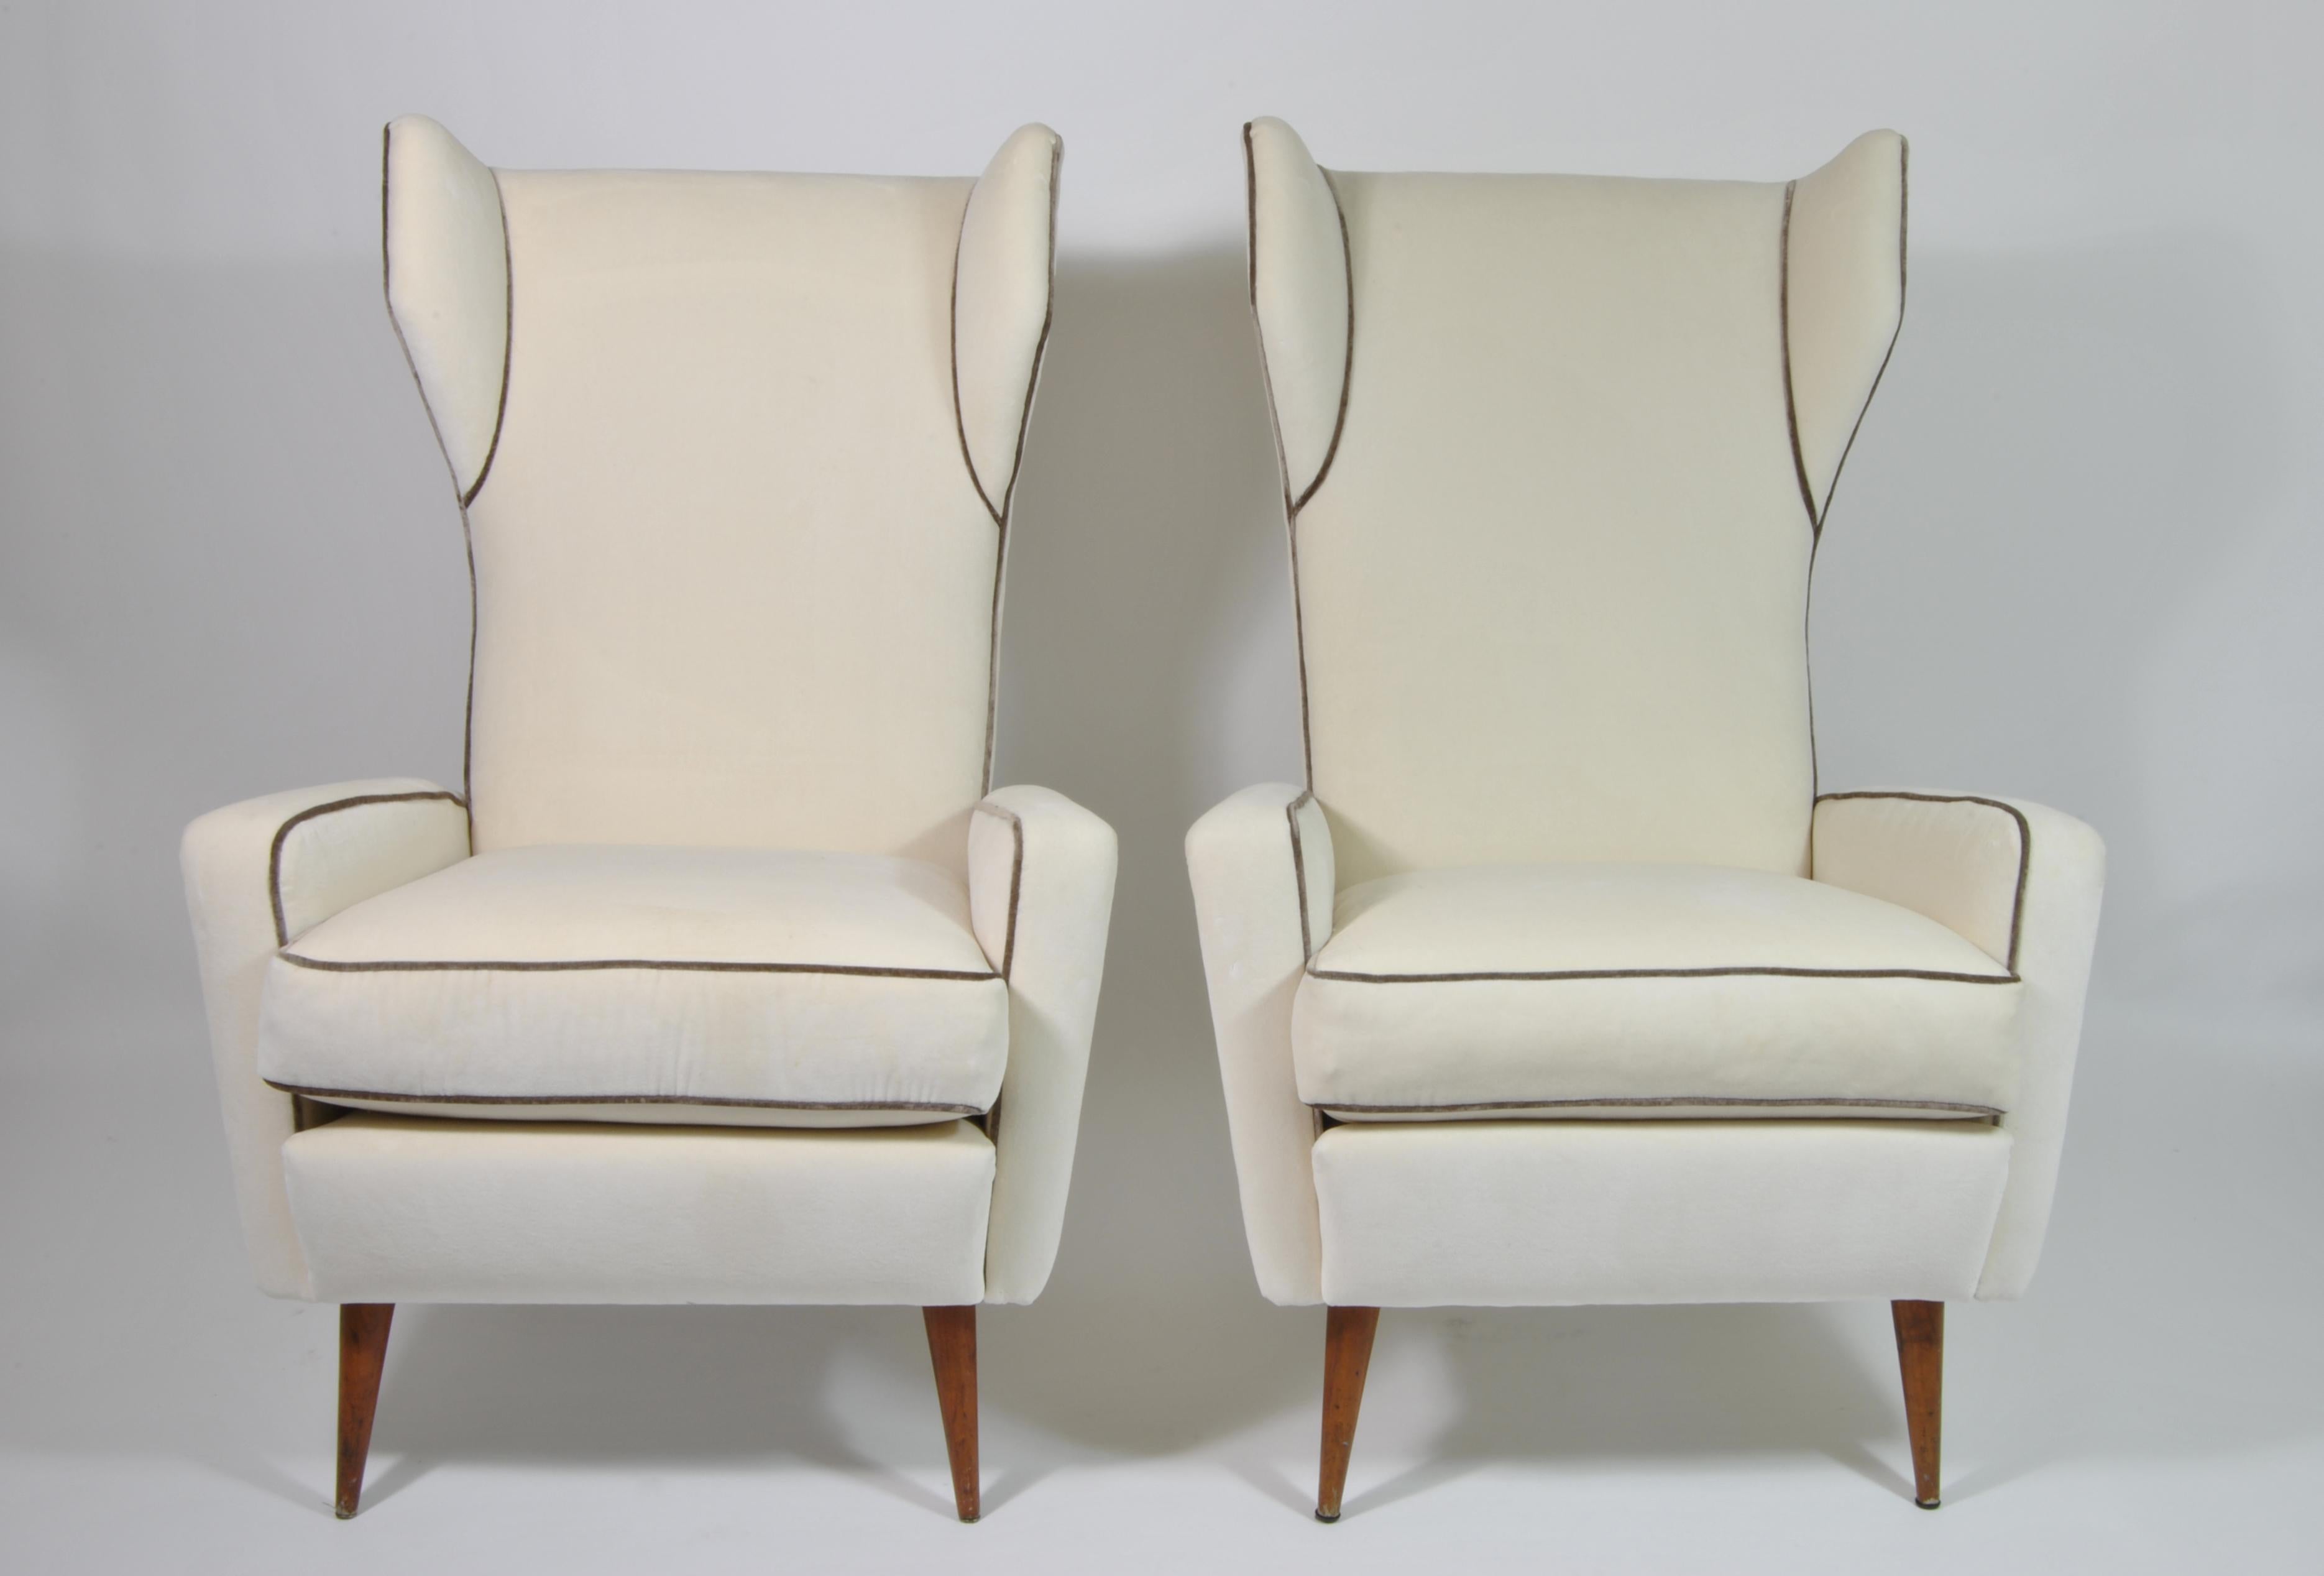 Bergère couple, Mod. 820, designed by Gio Ponti for the Royal Hotel in Naples and produced by Cassina, Italy, 1950.
Full restored and newly upholstered in cotton velvet ivory with taupe velvet profiles.